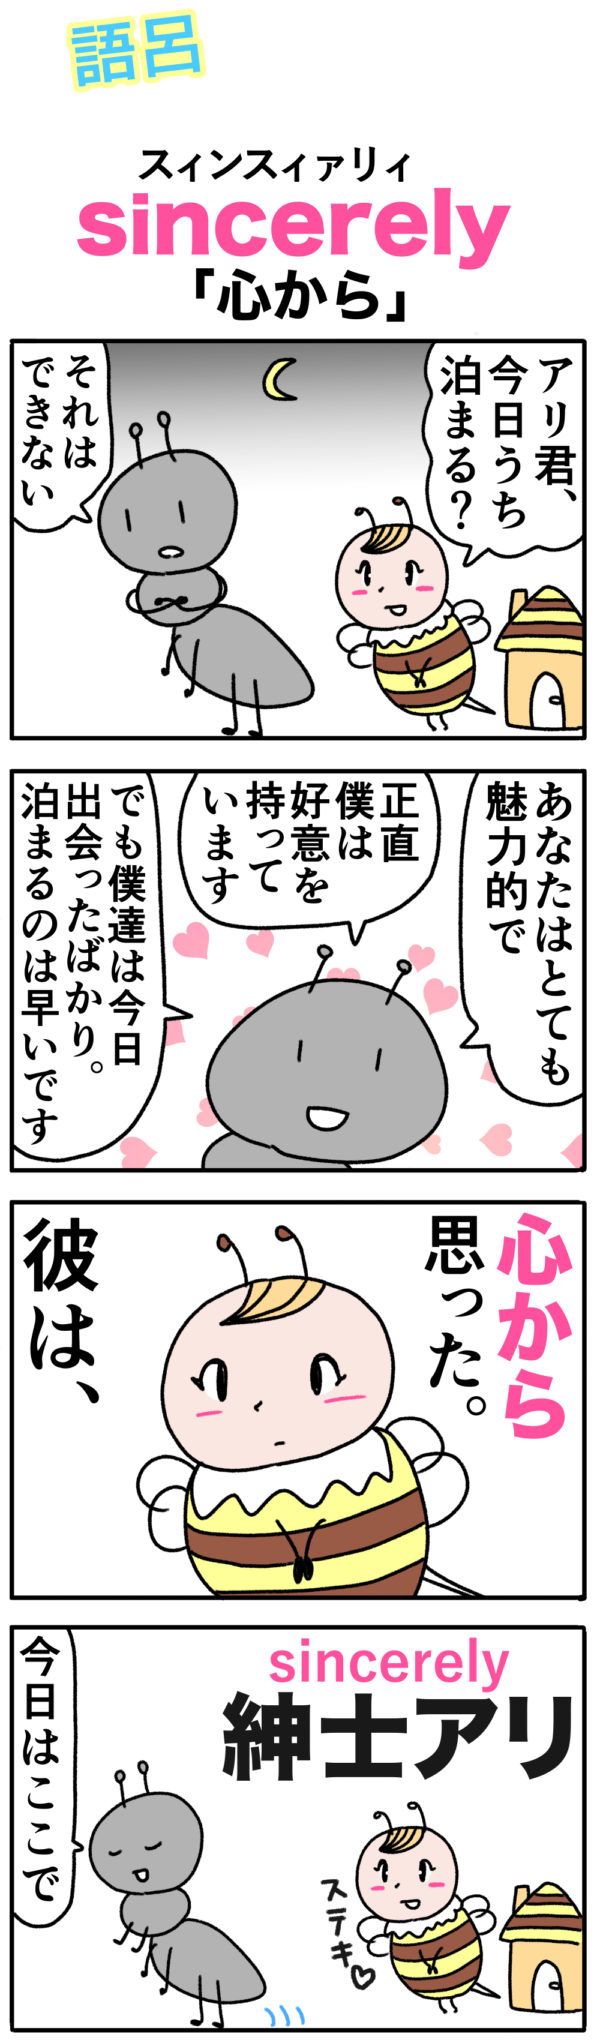 sincerely語呂合わせ